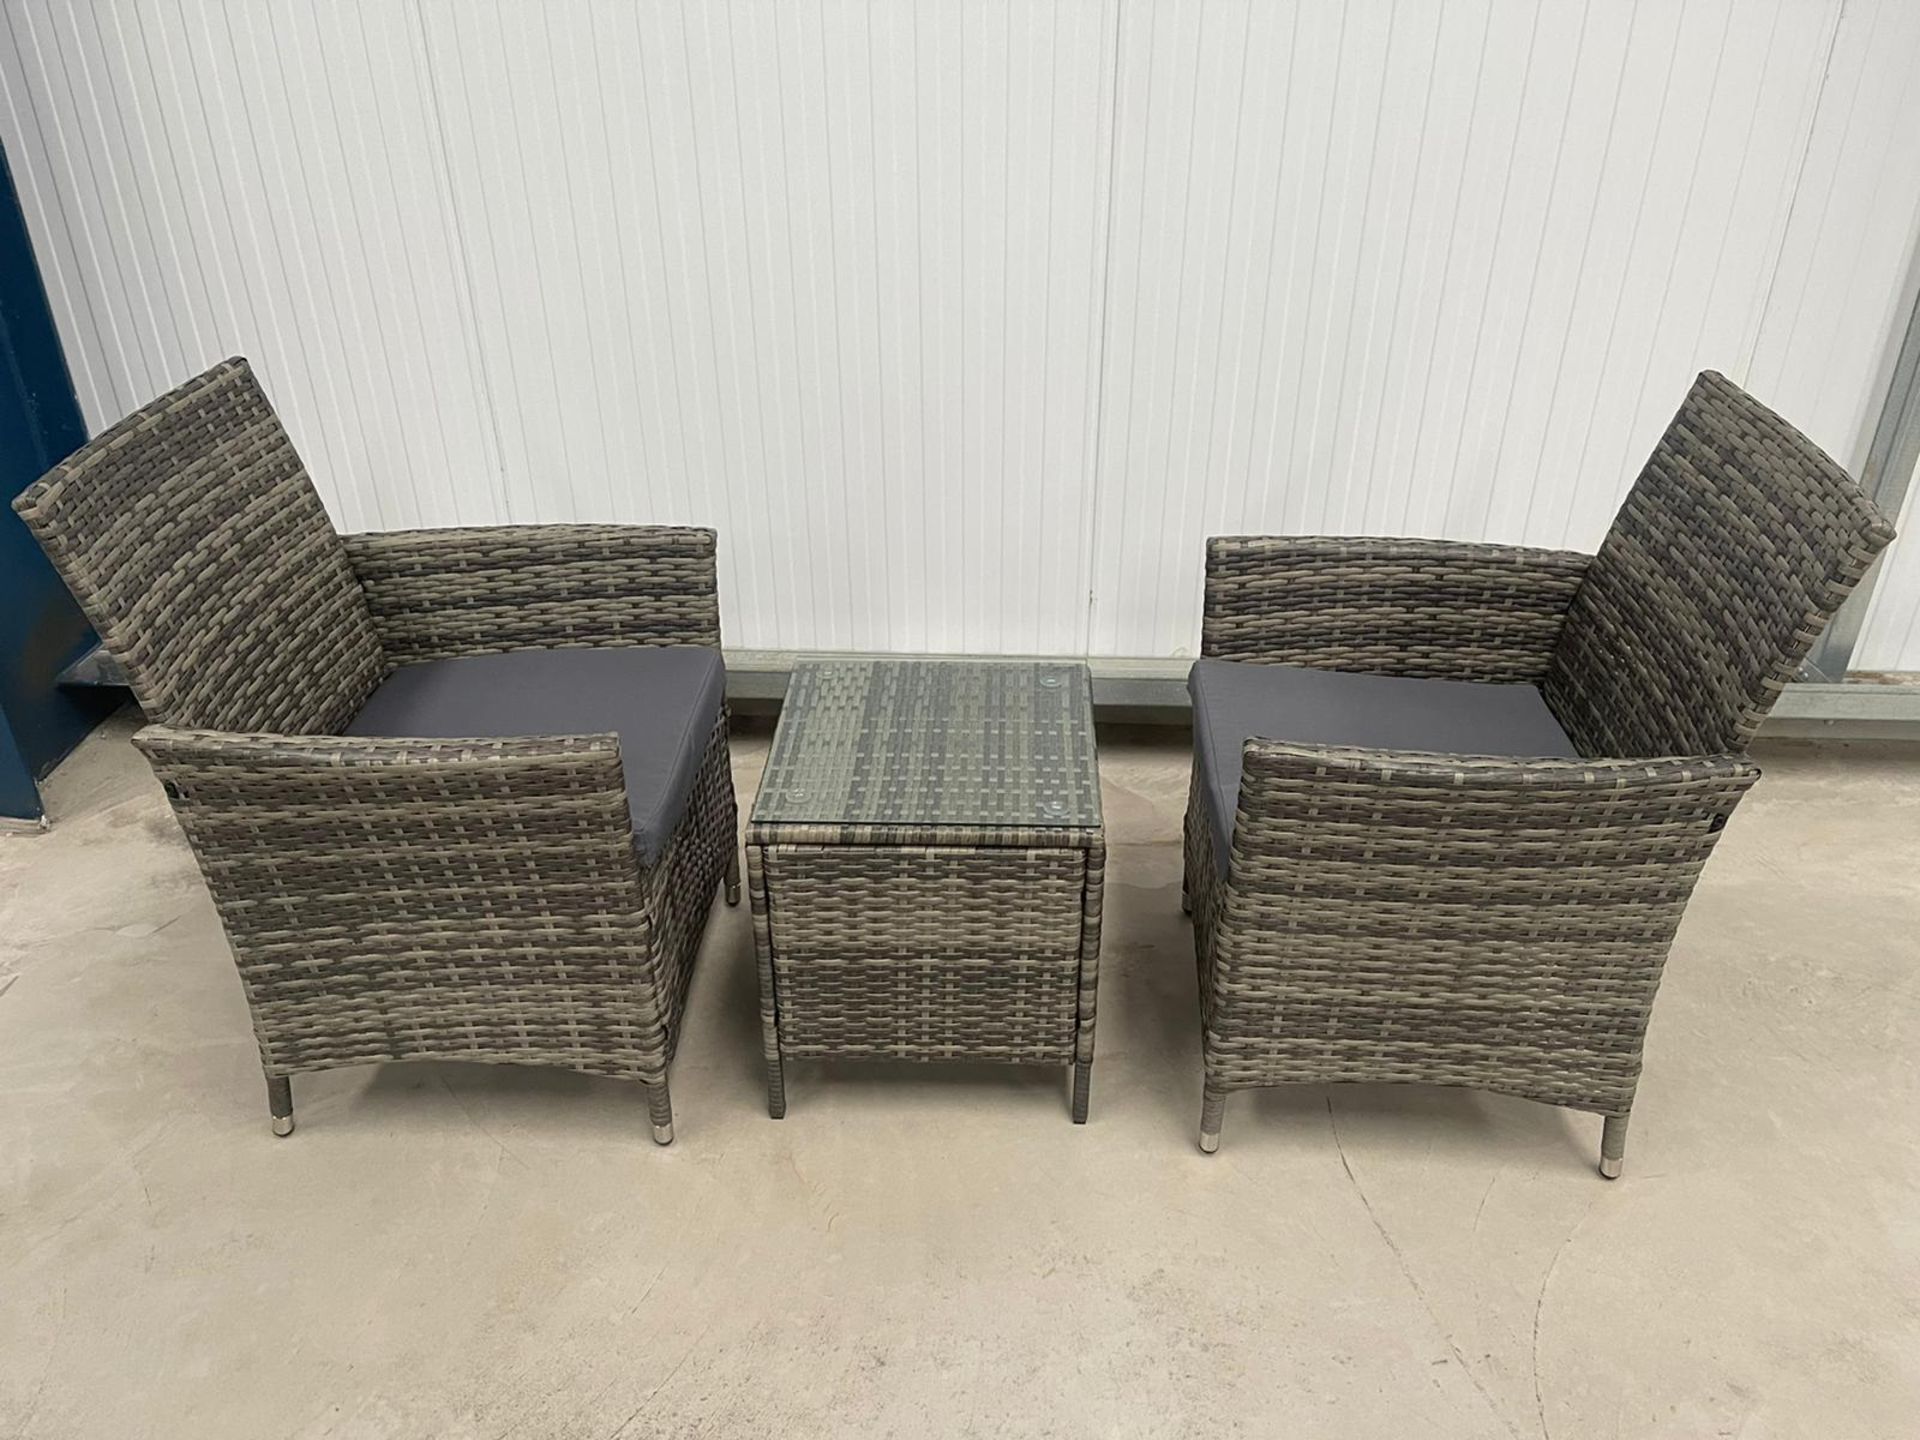 RRP £199 - NEW GREY BISTRO SET. TABLE 40 X 40 X 45CM, CHAIR 52 X 56 X 83CM - Image 2 of 4